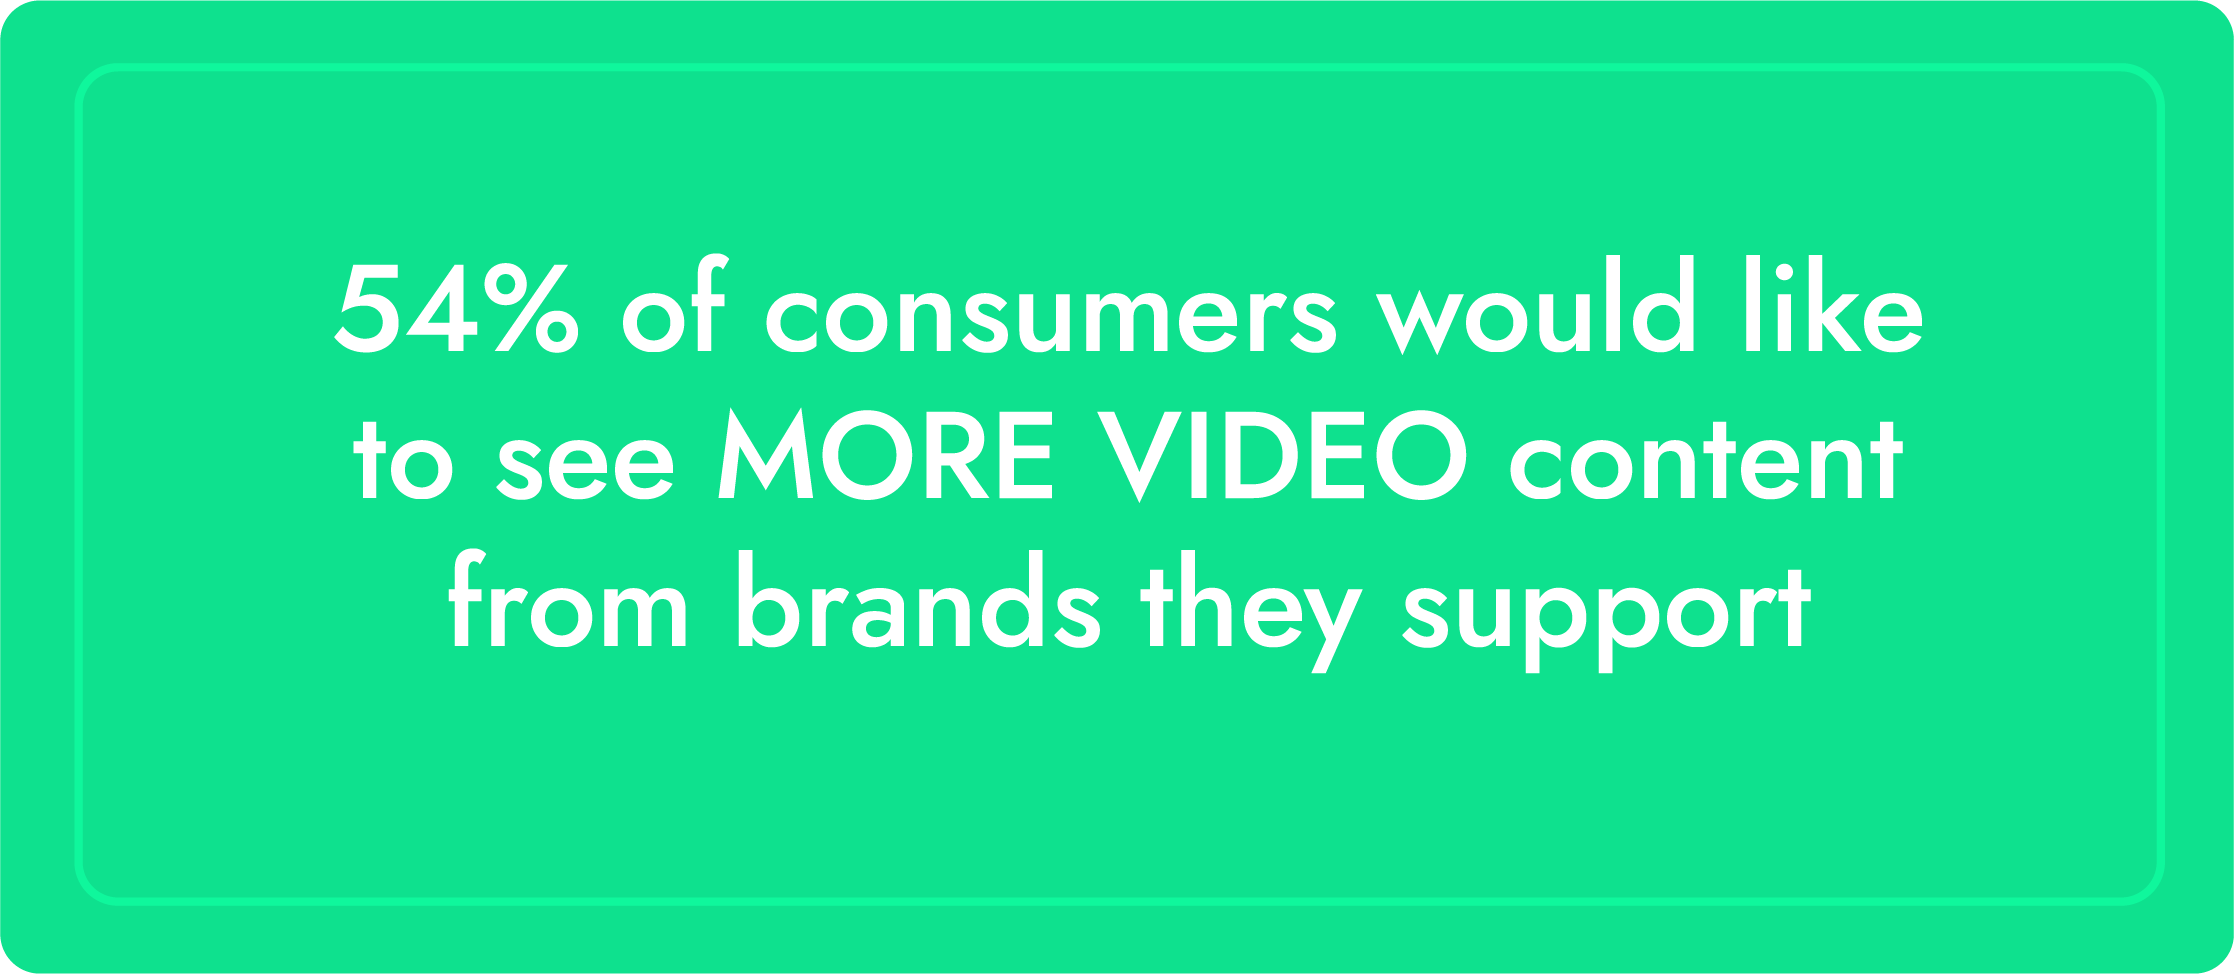 54% of consumers would like to see MORE VIDEO content from brands they support